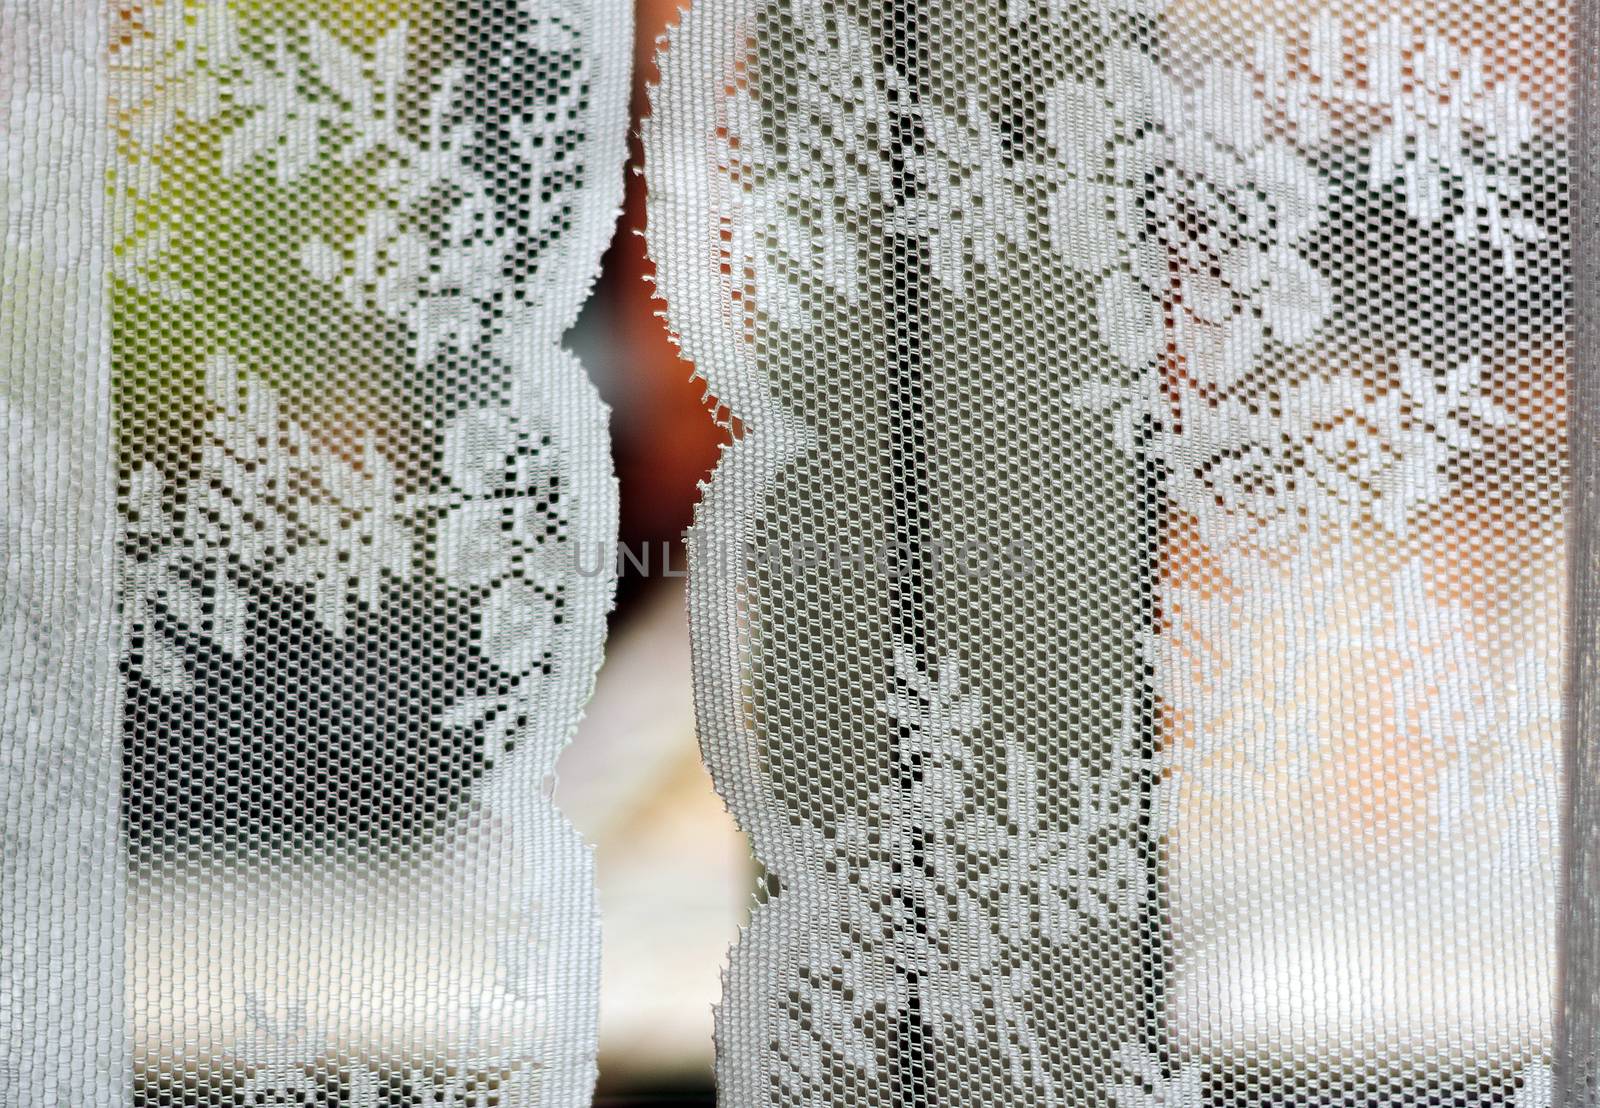 decorated curtains with white floral texture by rarrarorro